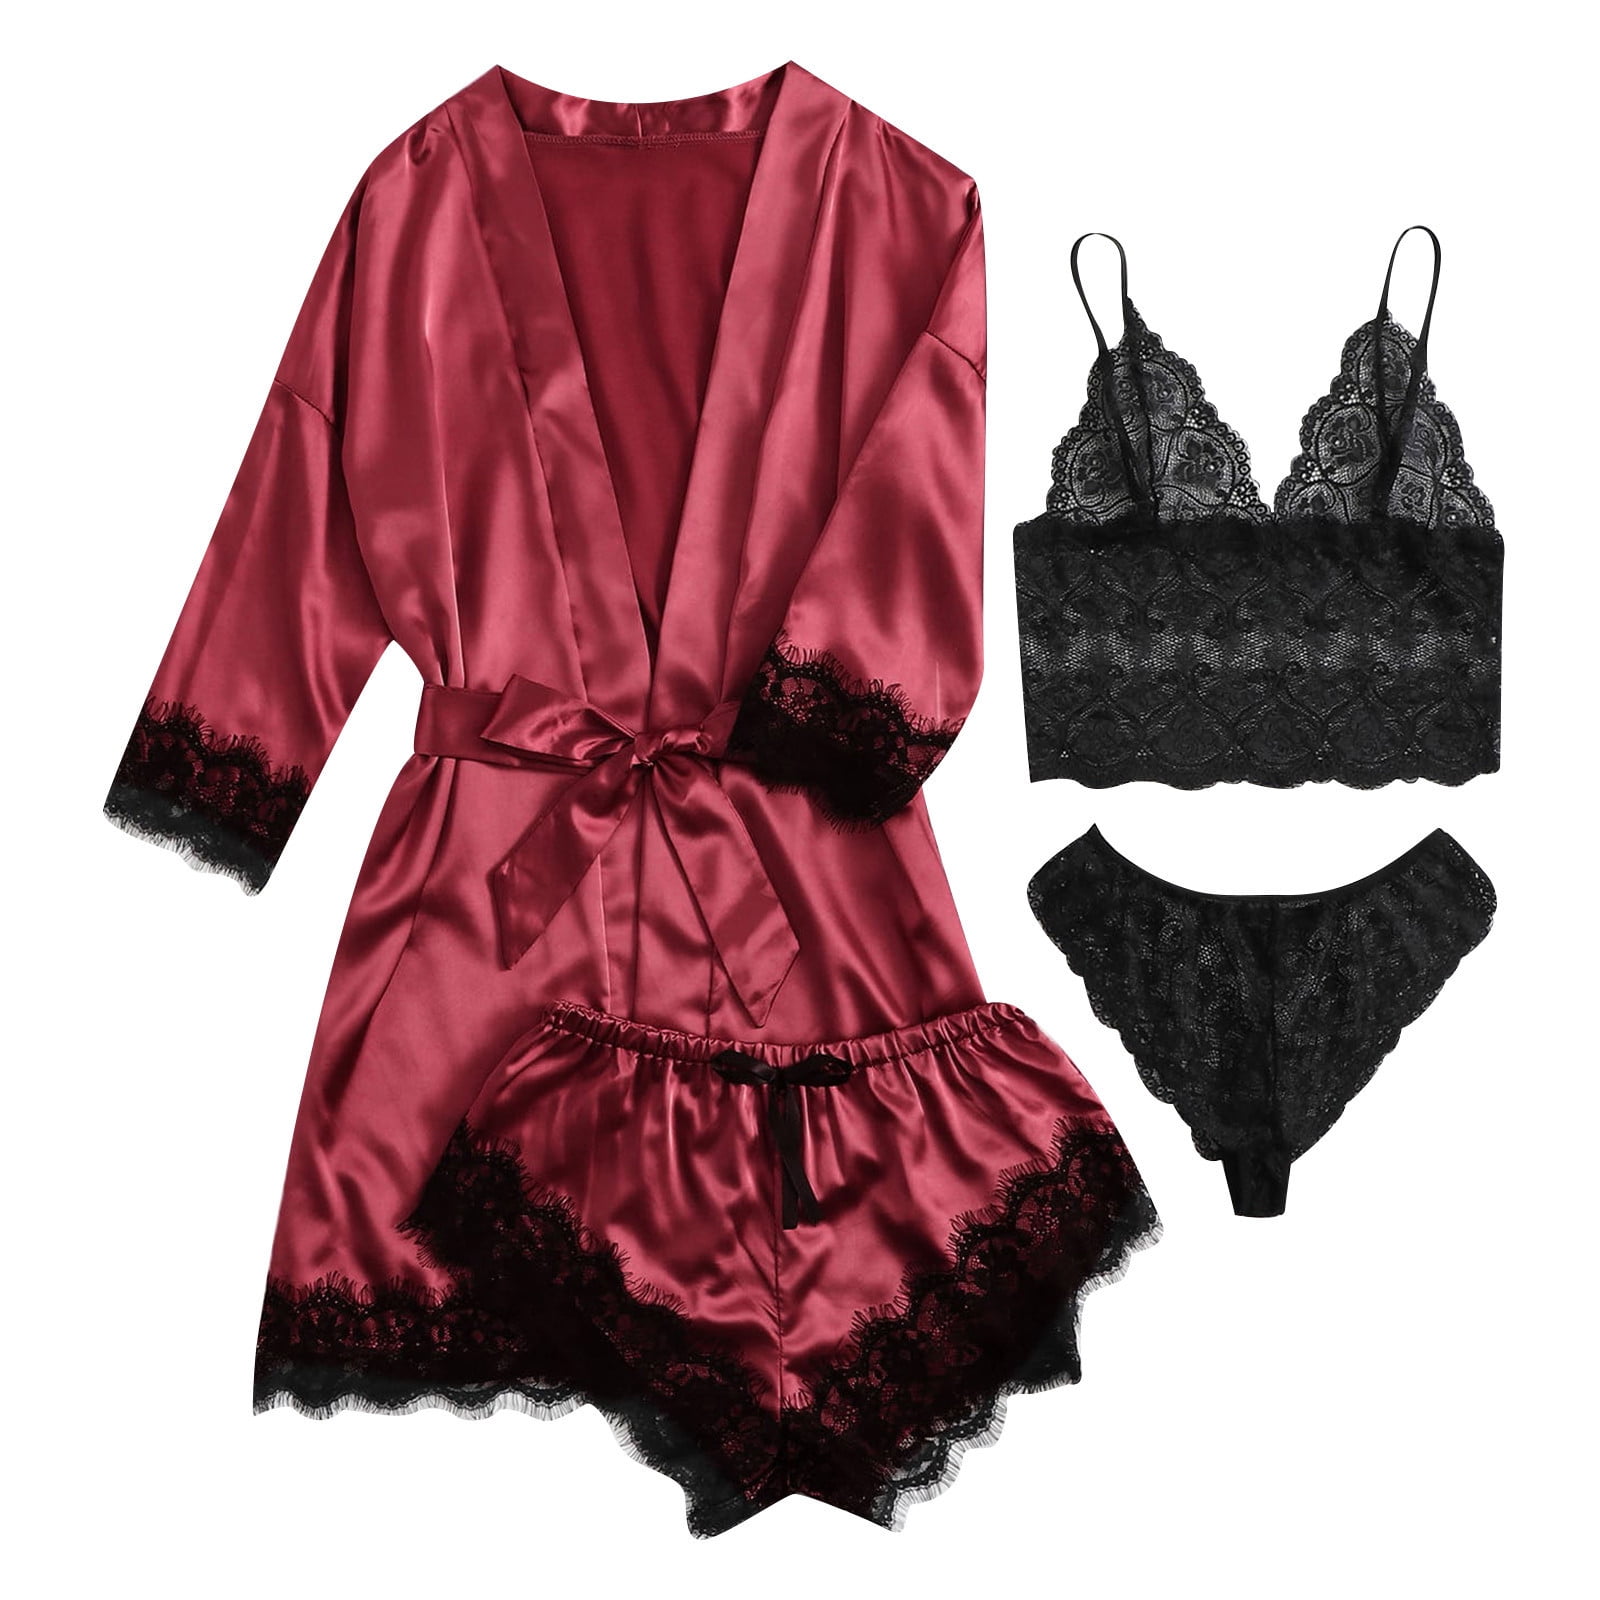 FY24 Valentine's Day Holiday Deals! itsun Womens Lingeries, Women Lace  Satin Bra Camisole Sling Tops Shorts Pajamas Two Piece Set Pink 